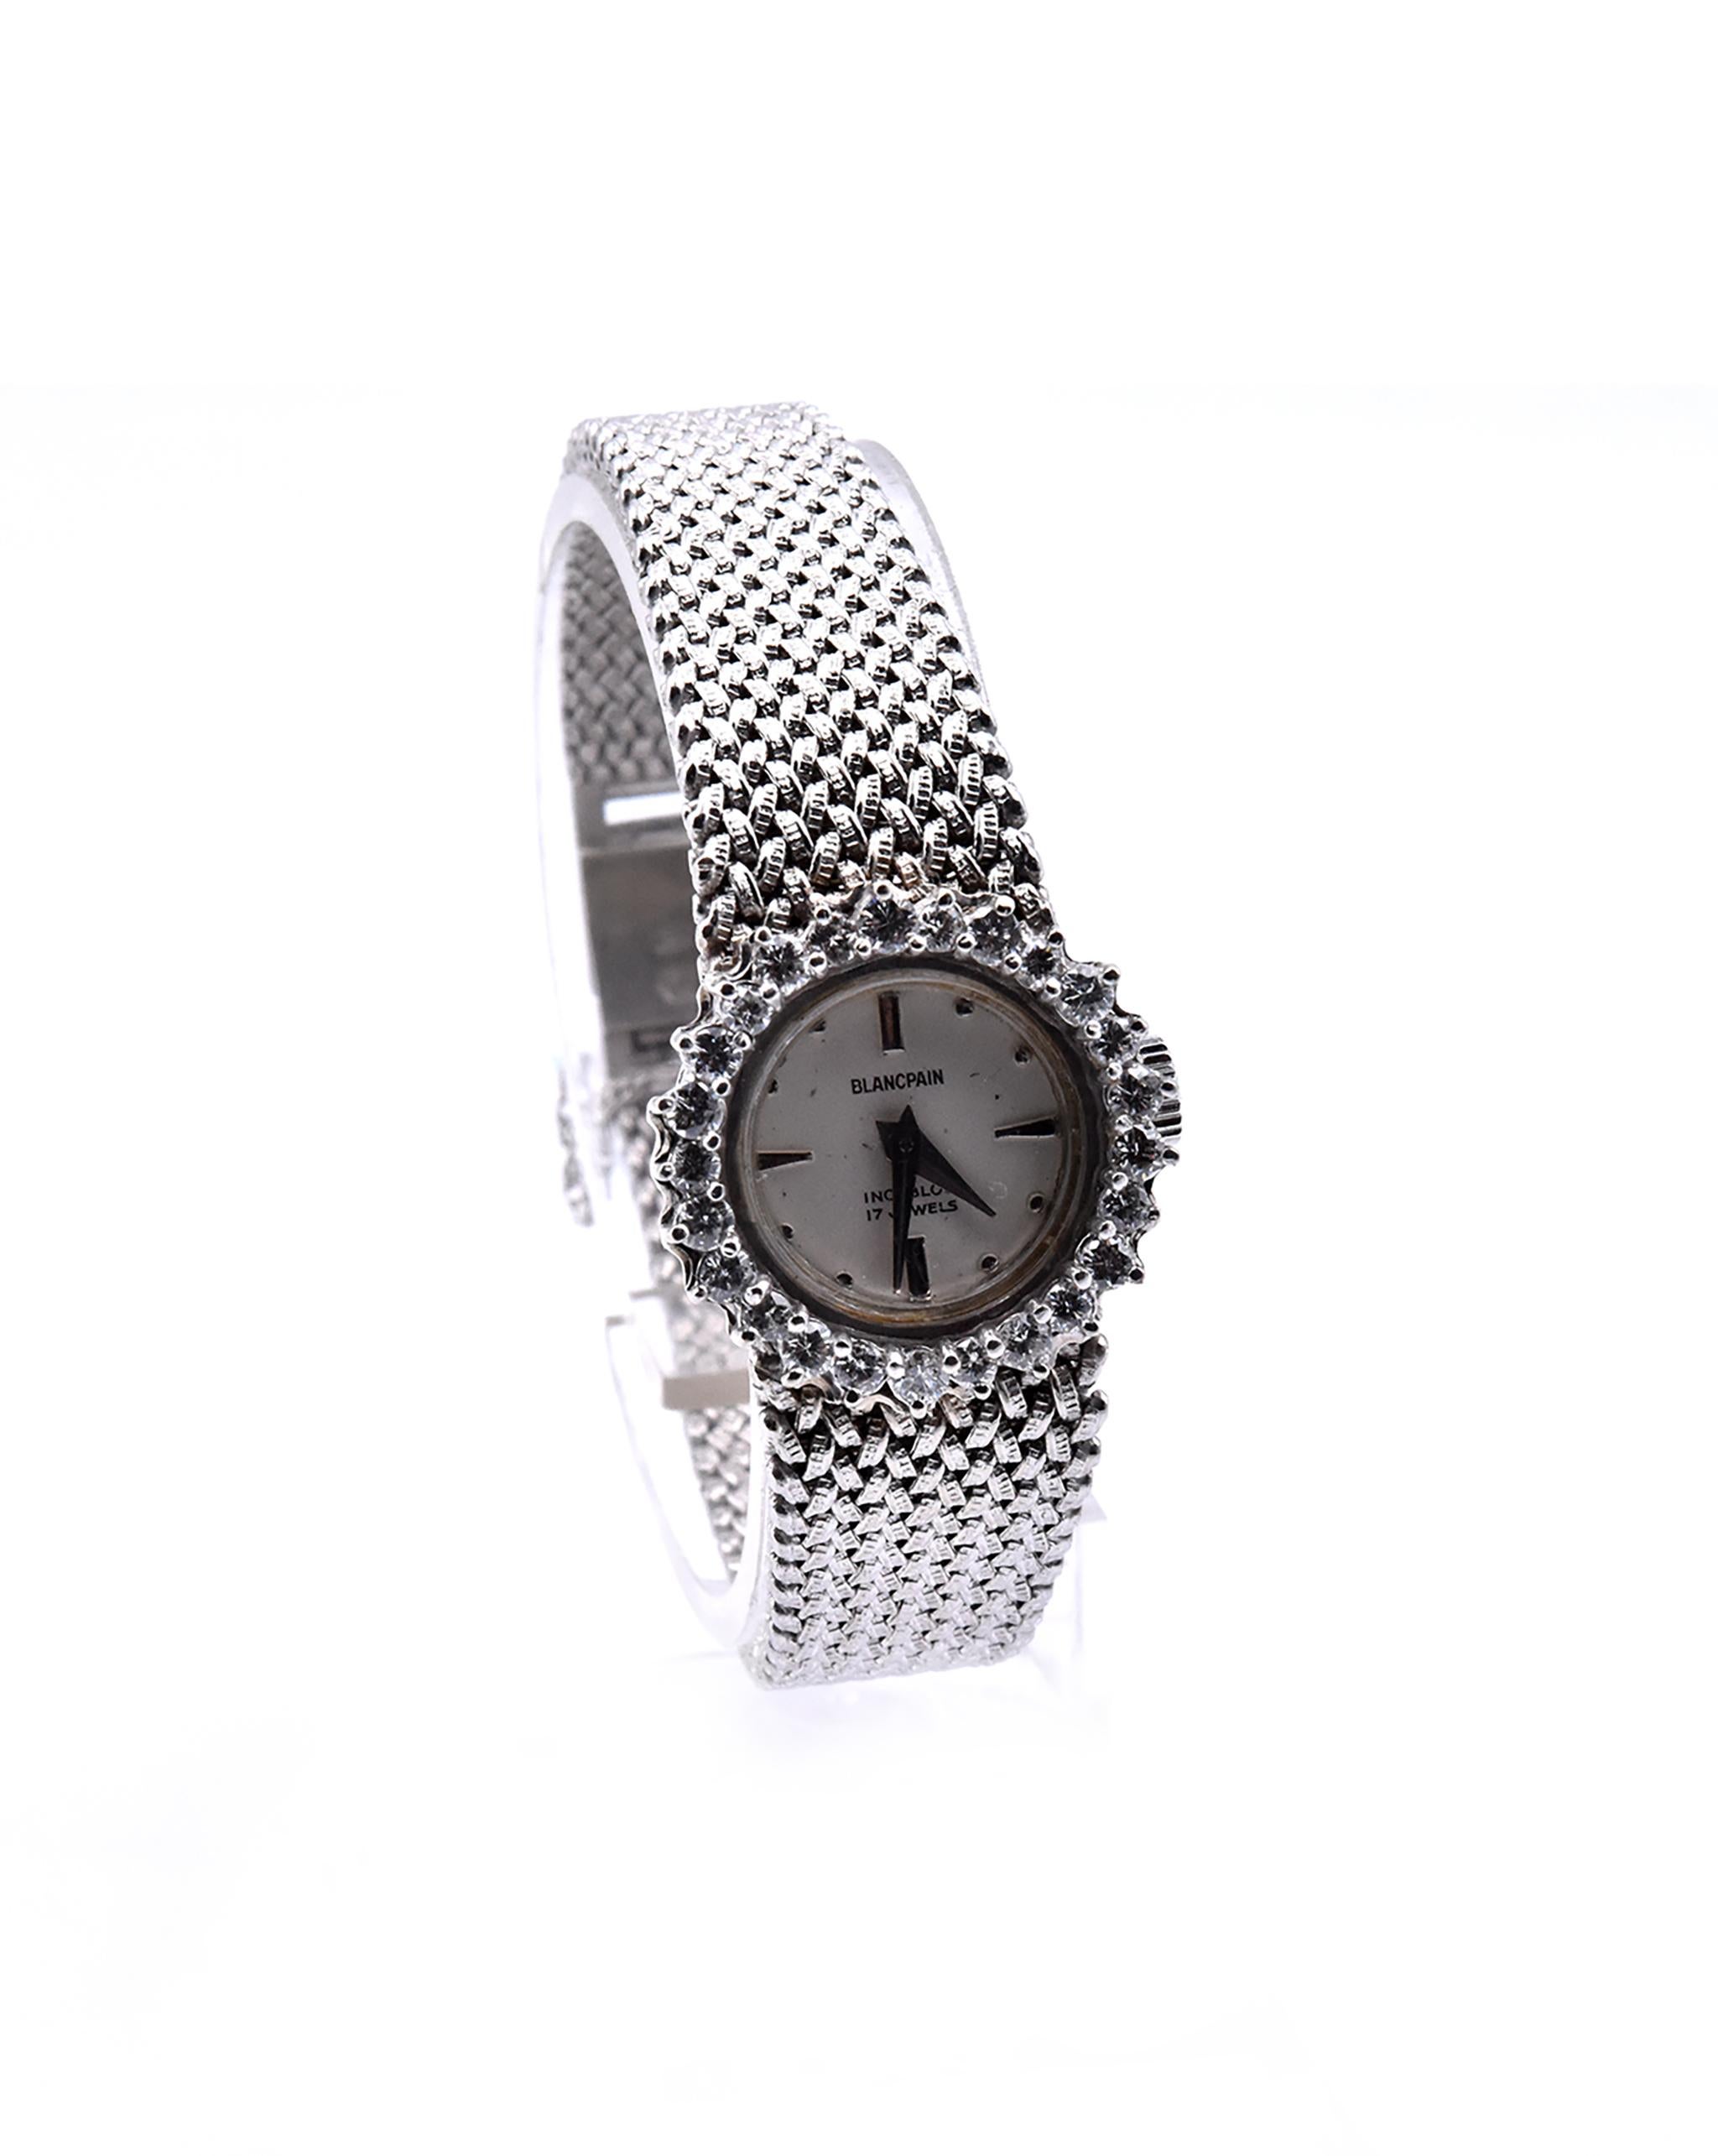 Movement: quartz
Function: hours, minutes
Case: 20mm round 14K white gold case, .60cttw diamond bezel, push pull crown
Band: 18K white gold mesh style bracelet with safety clasp
Dial: white dial with silver sticks
Serial #: Case Serial